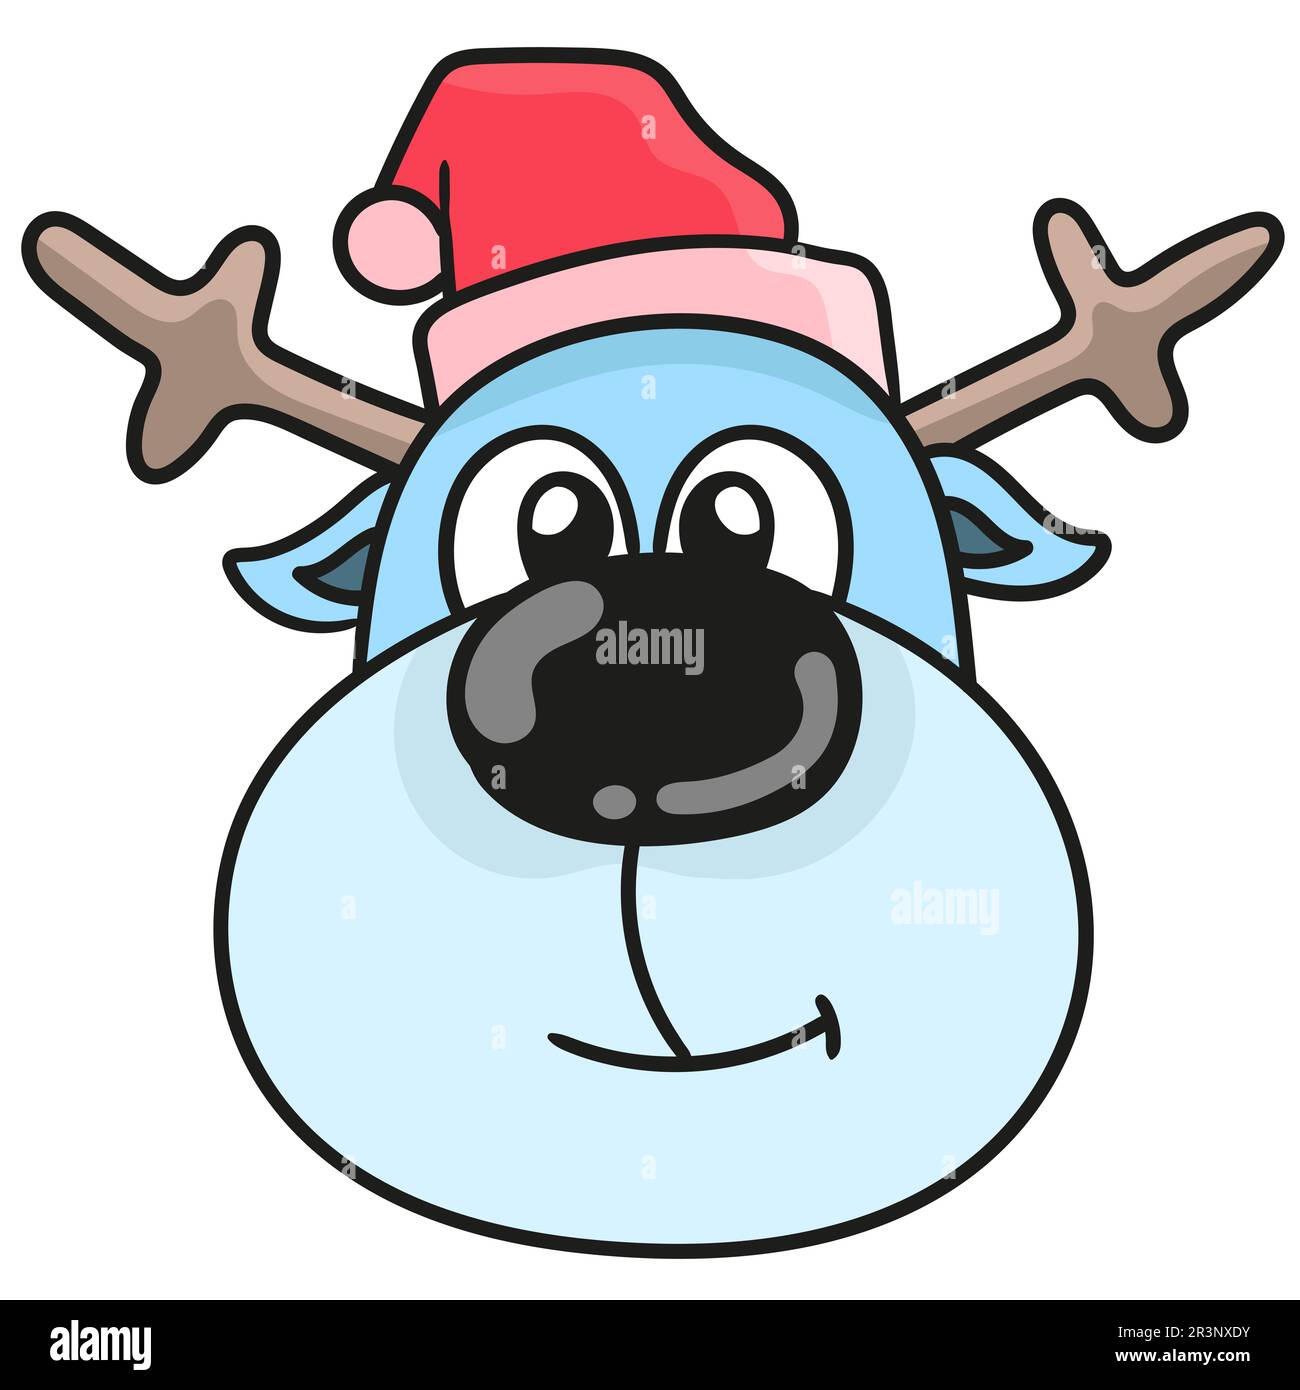 Animal head emoticon wearing a smiling christmas hat. doodle icon image Stock Photo